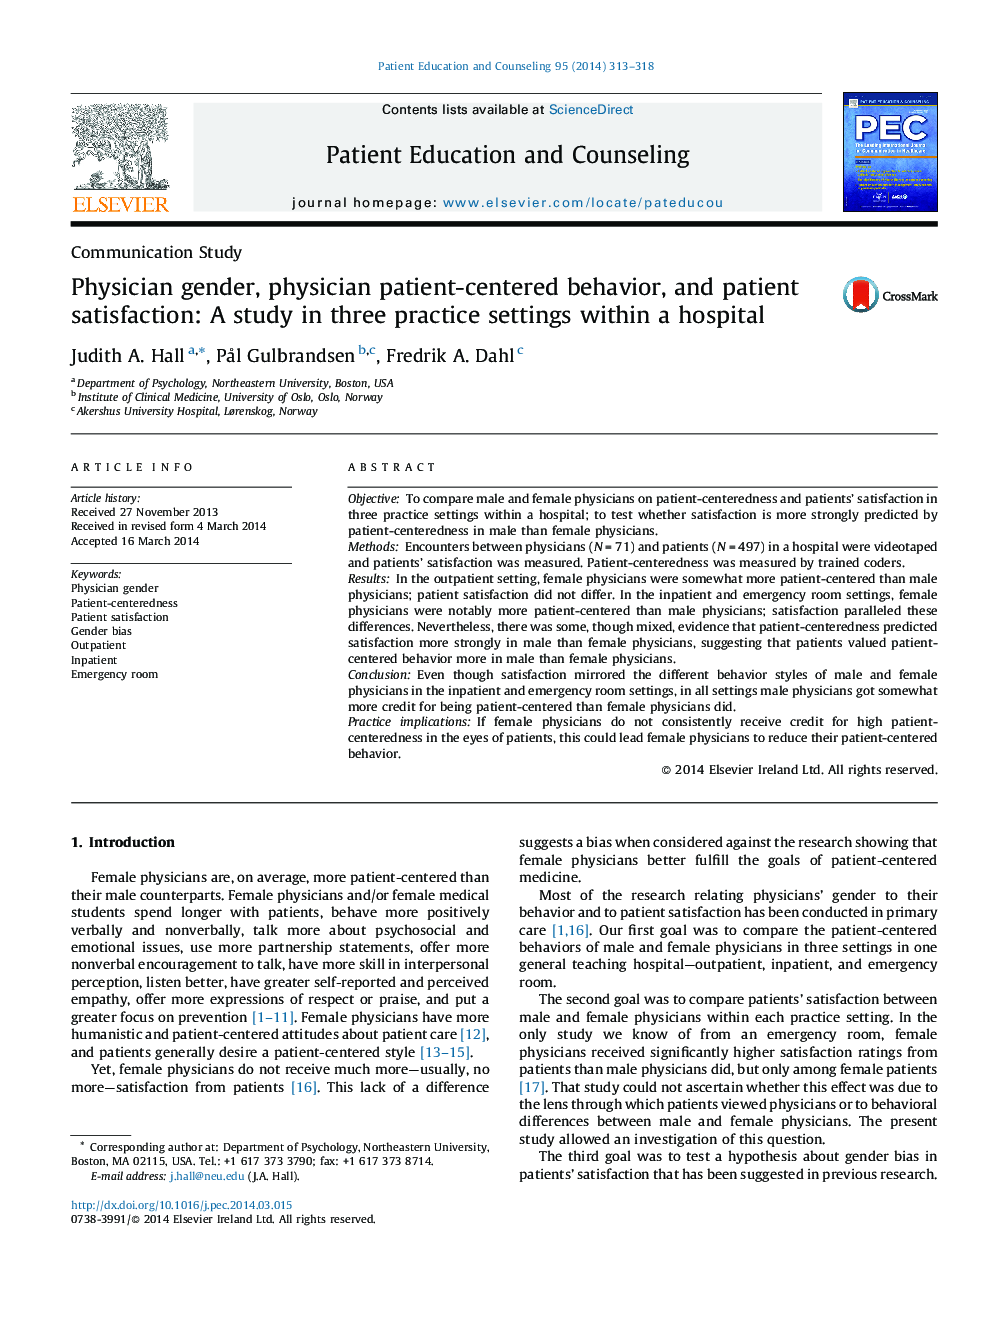 Physician gender, physician patient-centered behavior, and patient satisfaction: A study in three practice settings within a hospital